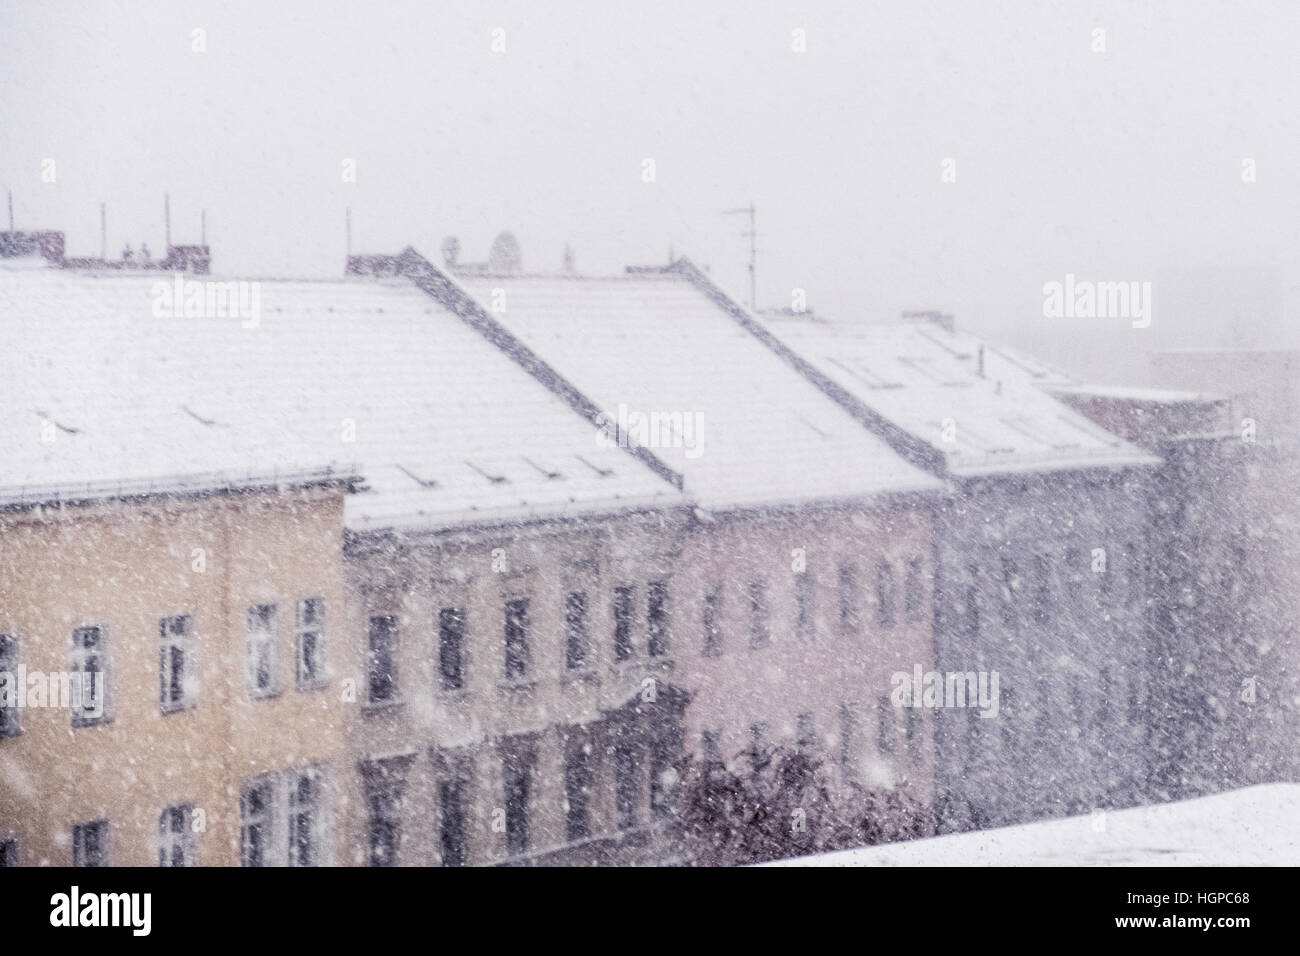 snow cityscape / rooftops during winter snowing Stock Photo